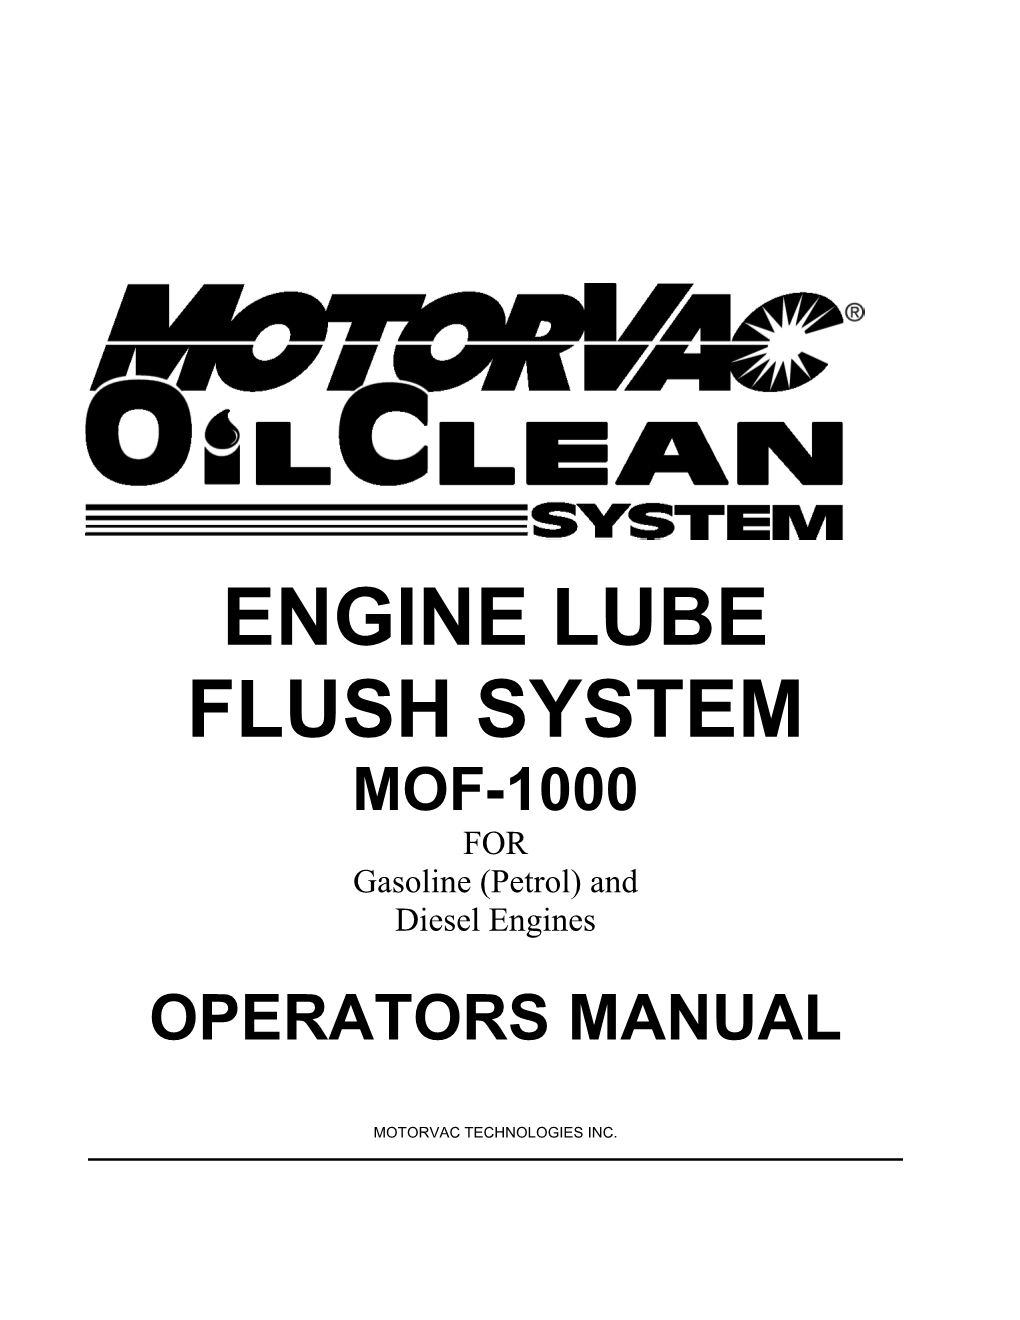 ENGINE LUBE FLUSH SYSTEM MOF-1000 for Gasoline (Petrol) and Diesel Engines